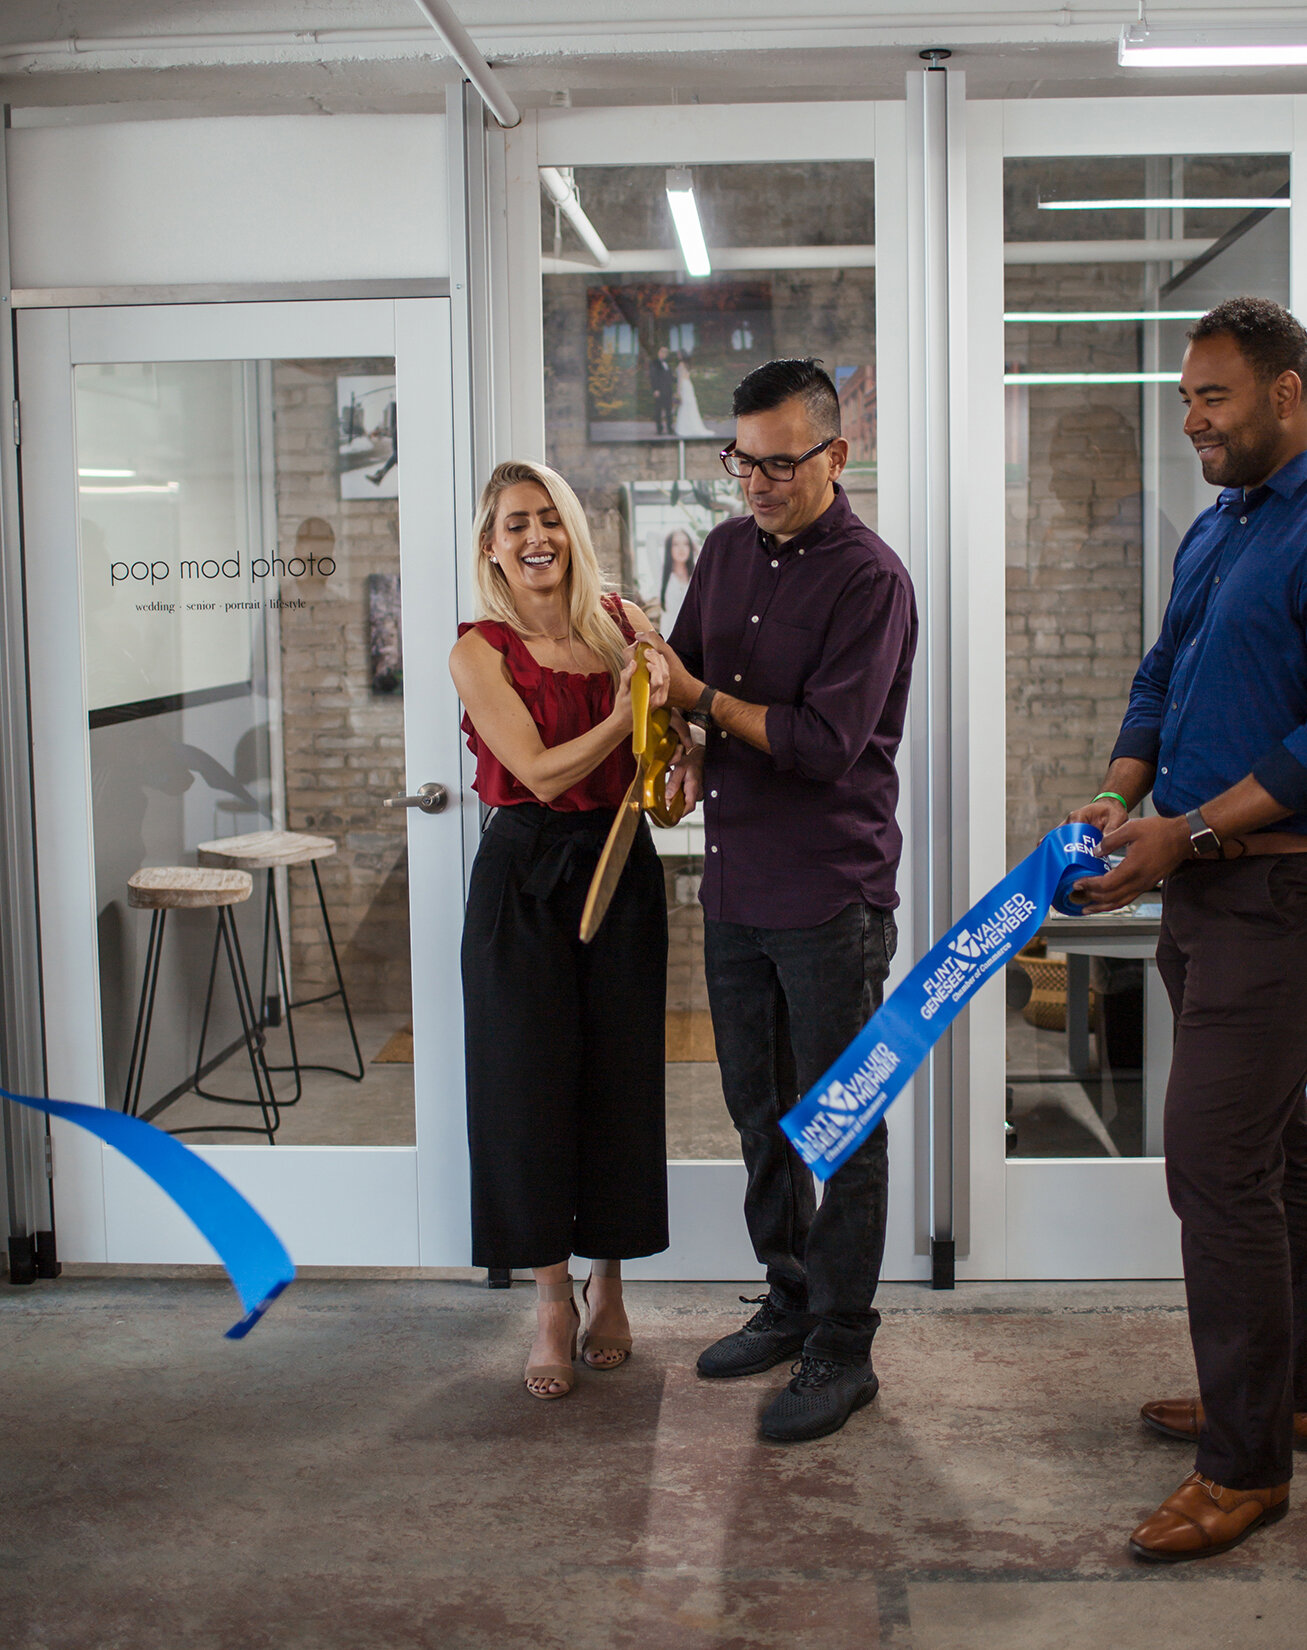  Pop Mod Photo owners Courtney Simpson and Ryan Garza cut the ribbon for the grand opening of their photo studio at the Ferris Wheel building in downtown Flint along with the Genesee Area Chamber of Commerce. 